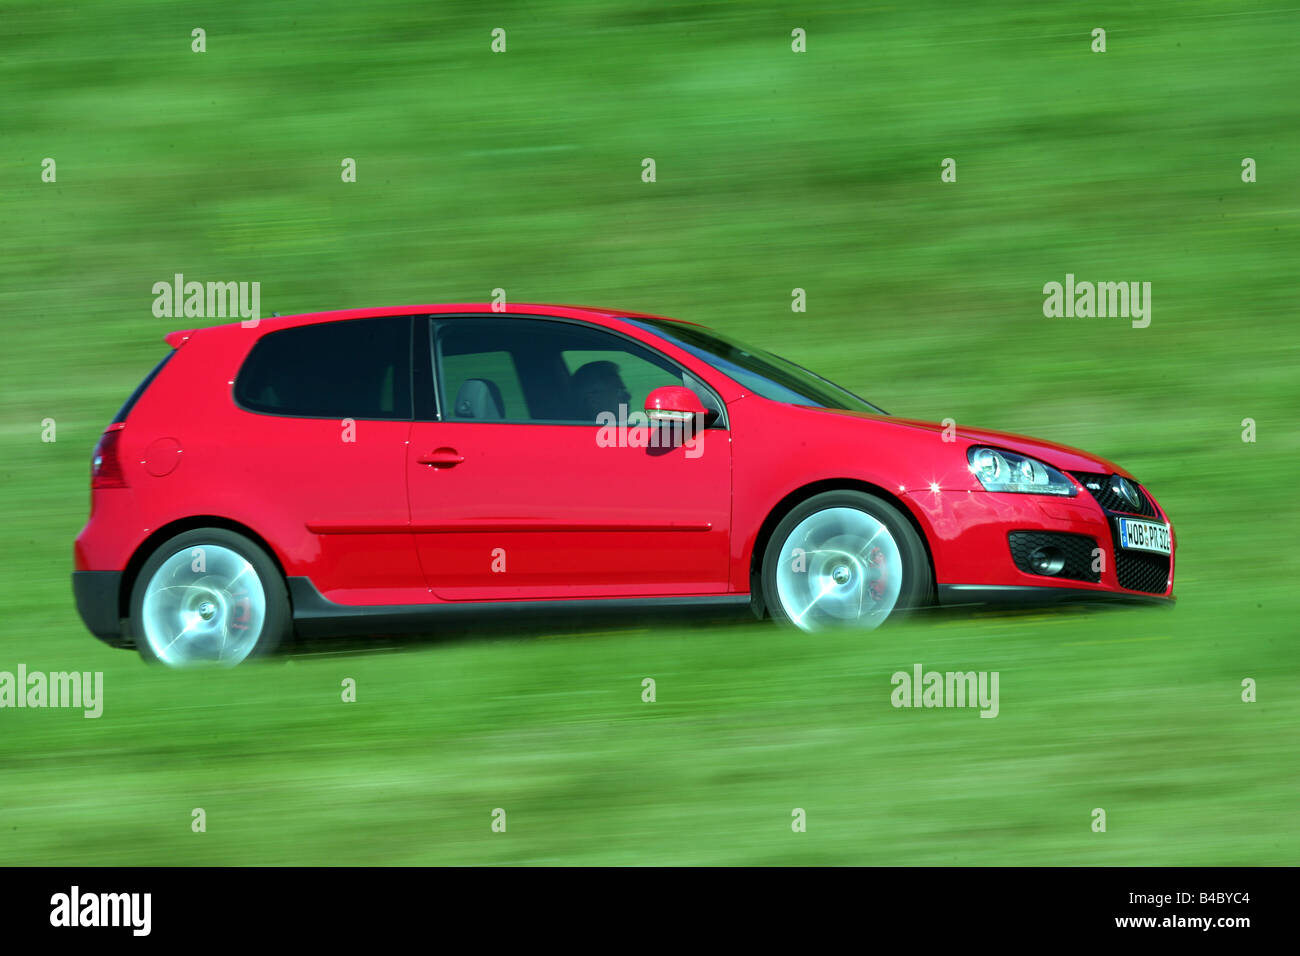 Car, VW Volkswagen Golf GTI, Golf V, model year 2004-, red, Limousine,  Lower middle-sized class, driving, side view, country roa Stock Photo -  Alamy